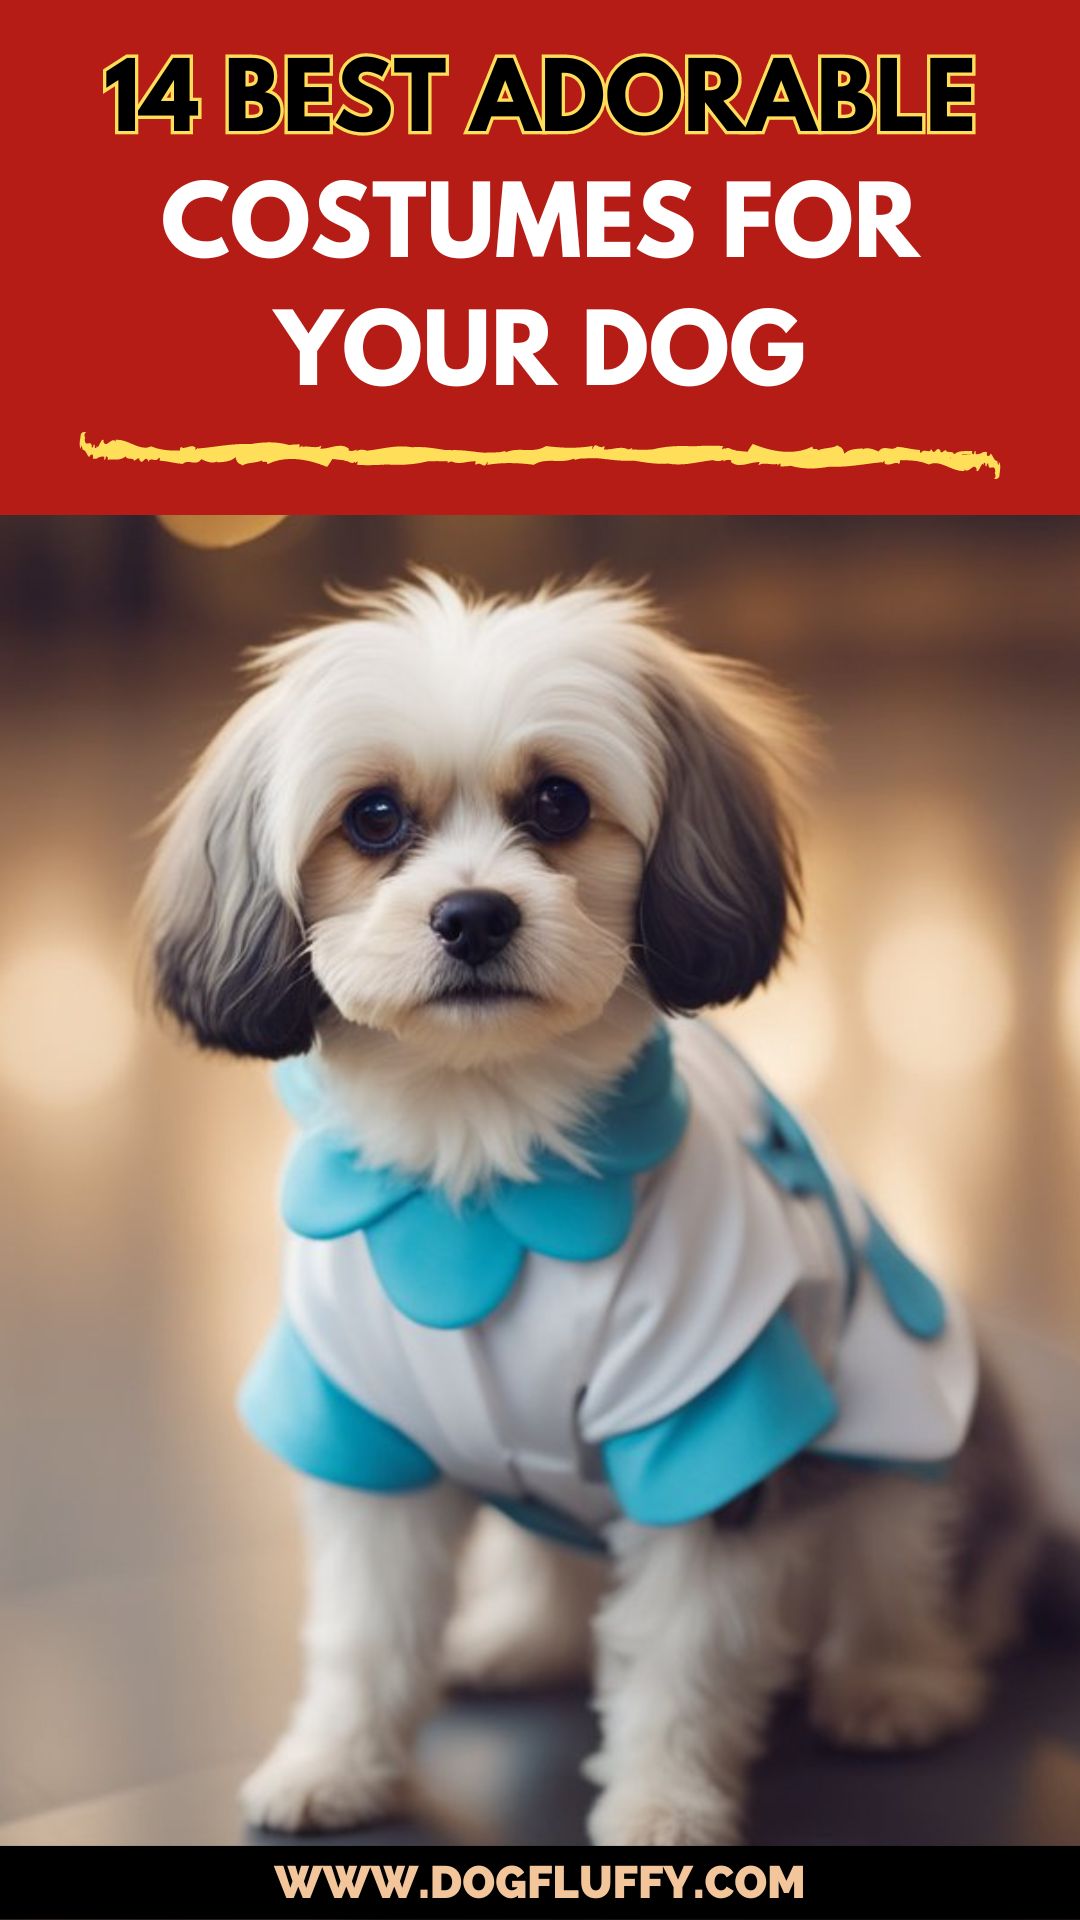 14 Best Adorable Costumes for Your Dog - PIN 1080  1920